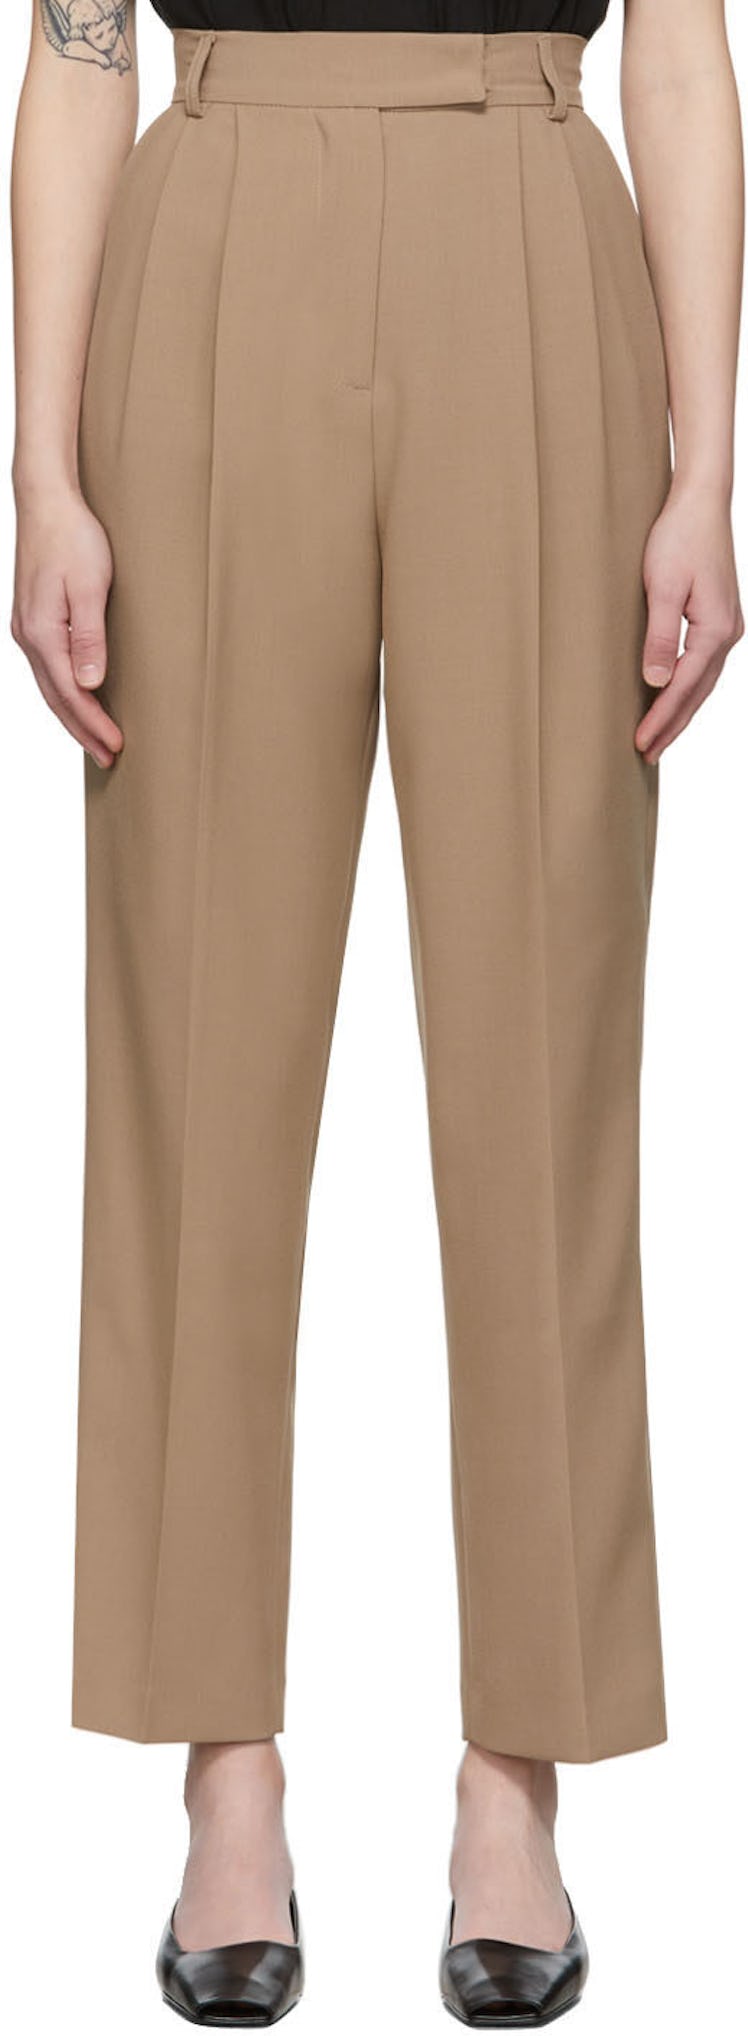 The Frankie Shop trousers island dressing